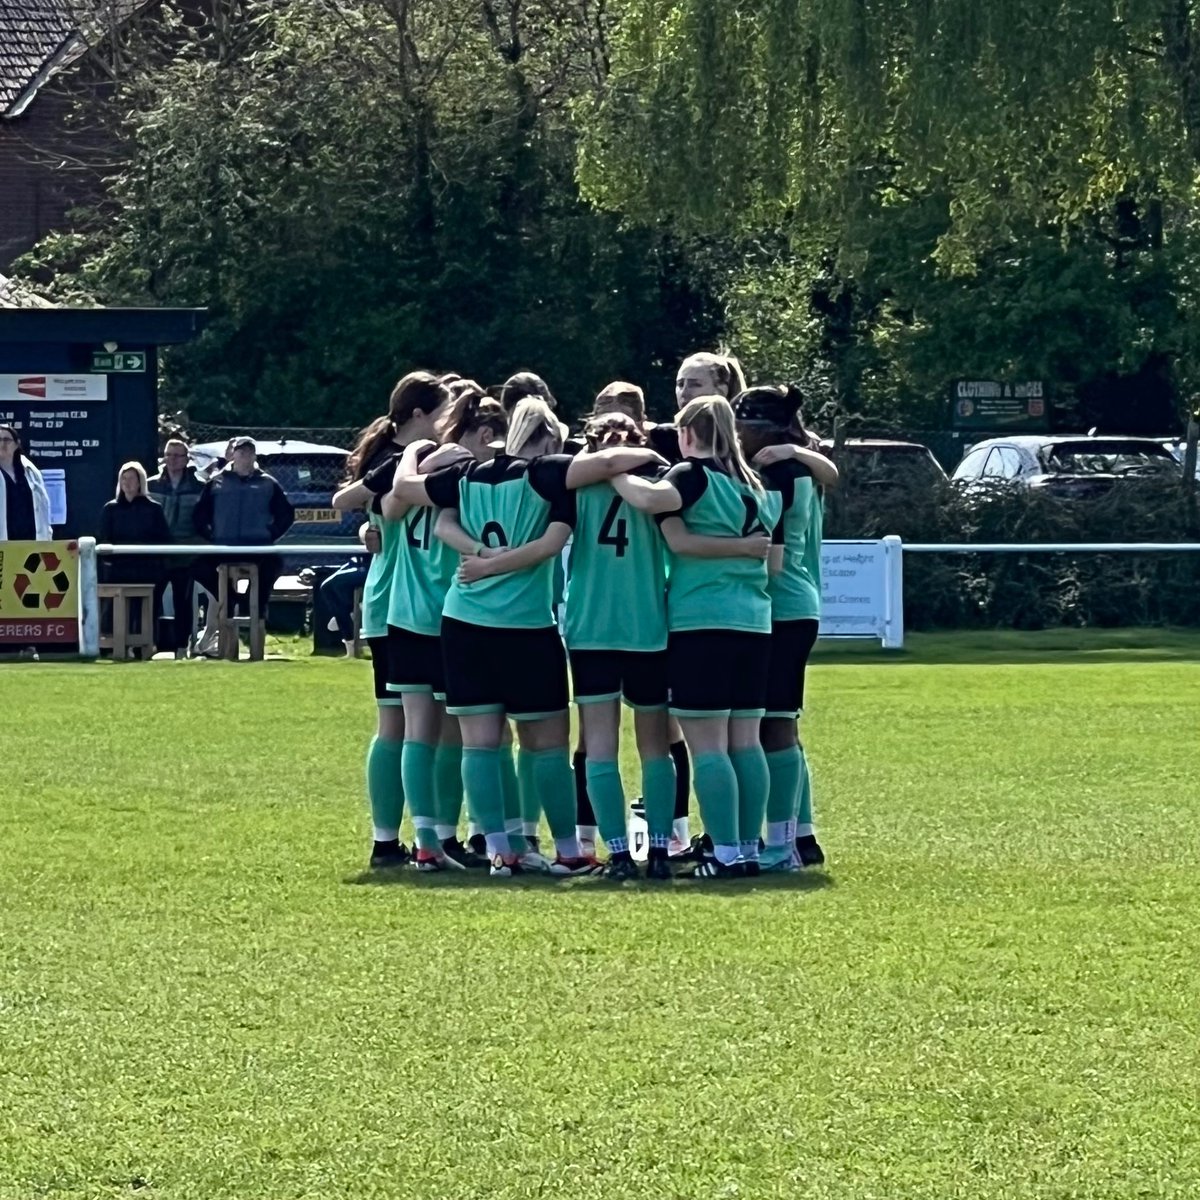 We await the results from today’s match between @DH_Women and @MulbartonLadies to see if we get promotion….the odds are not in our favour, even if mulbarton win we are behind on goal difference by 4…but.. you never know… #uptheharps #oneteamonetown🟡🟢🦌 #womensfootball